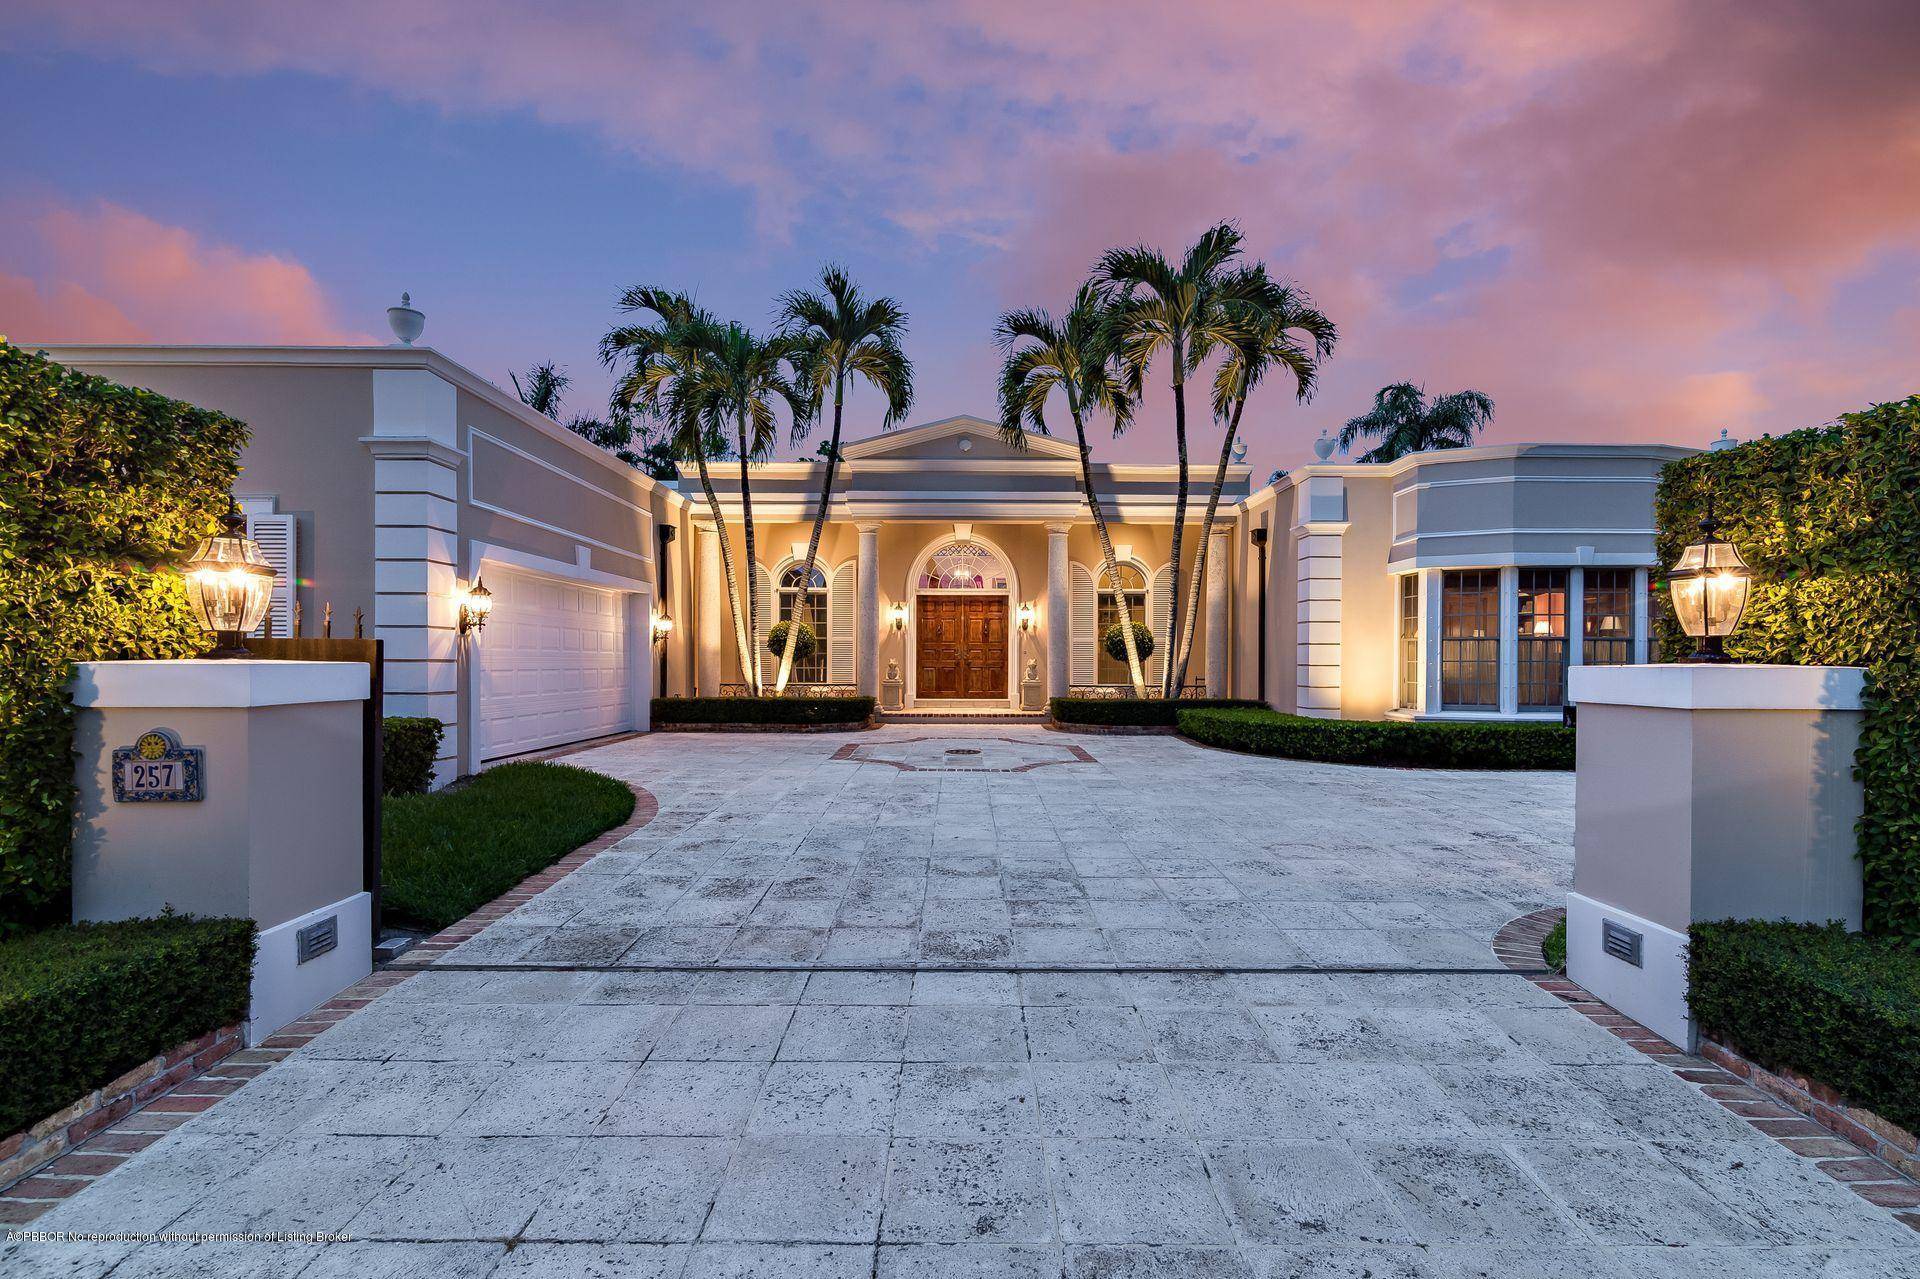 ELEGANT REGENCY ON COVETED WEST INDIES DRIVE This gracious gated Estate situated on sprawling 15, 000 sqft offering a total of 4841 sqft, just 1 2 a block from the ...